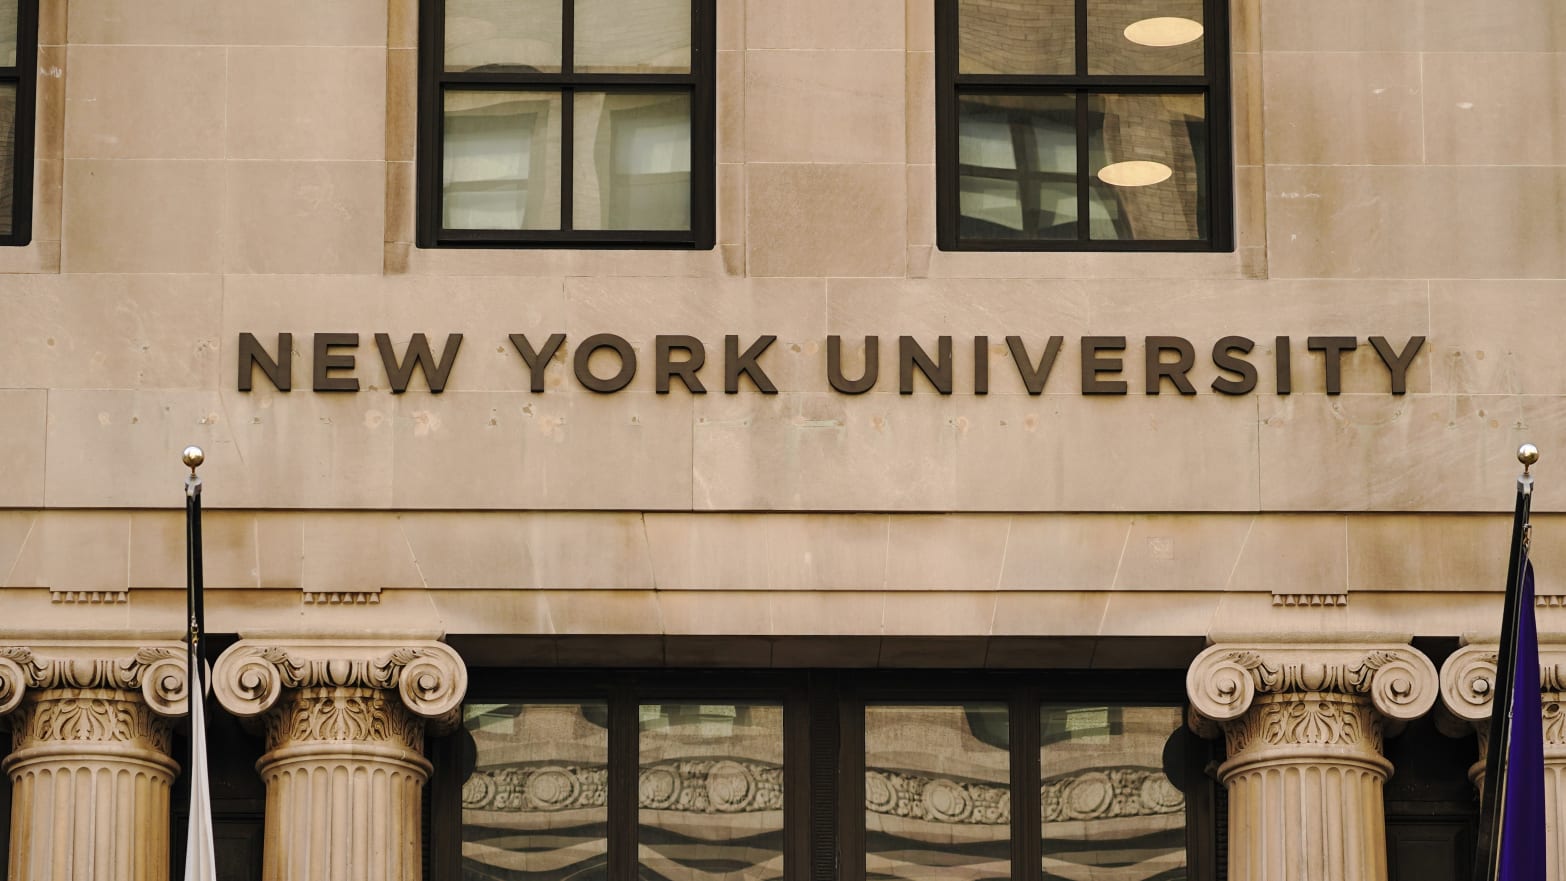 A view of New York University sign on the campus building.